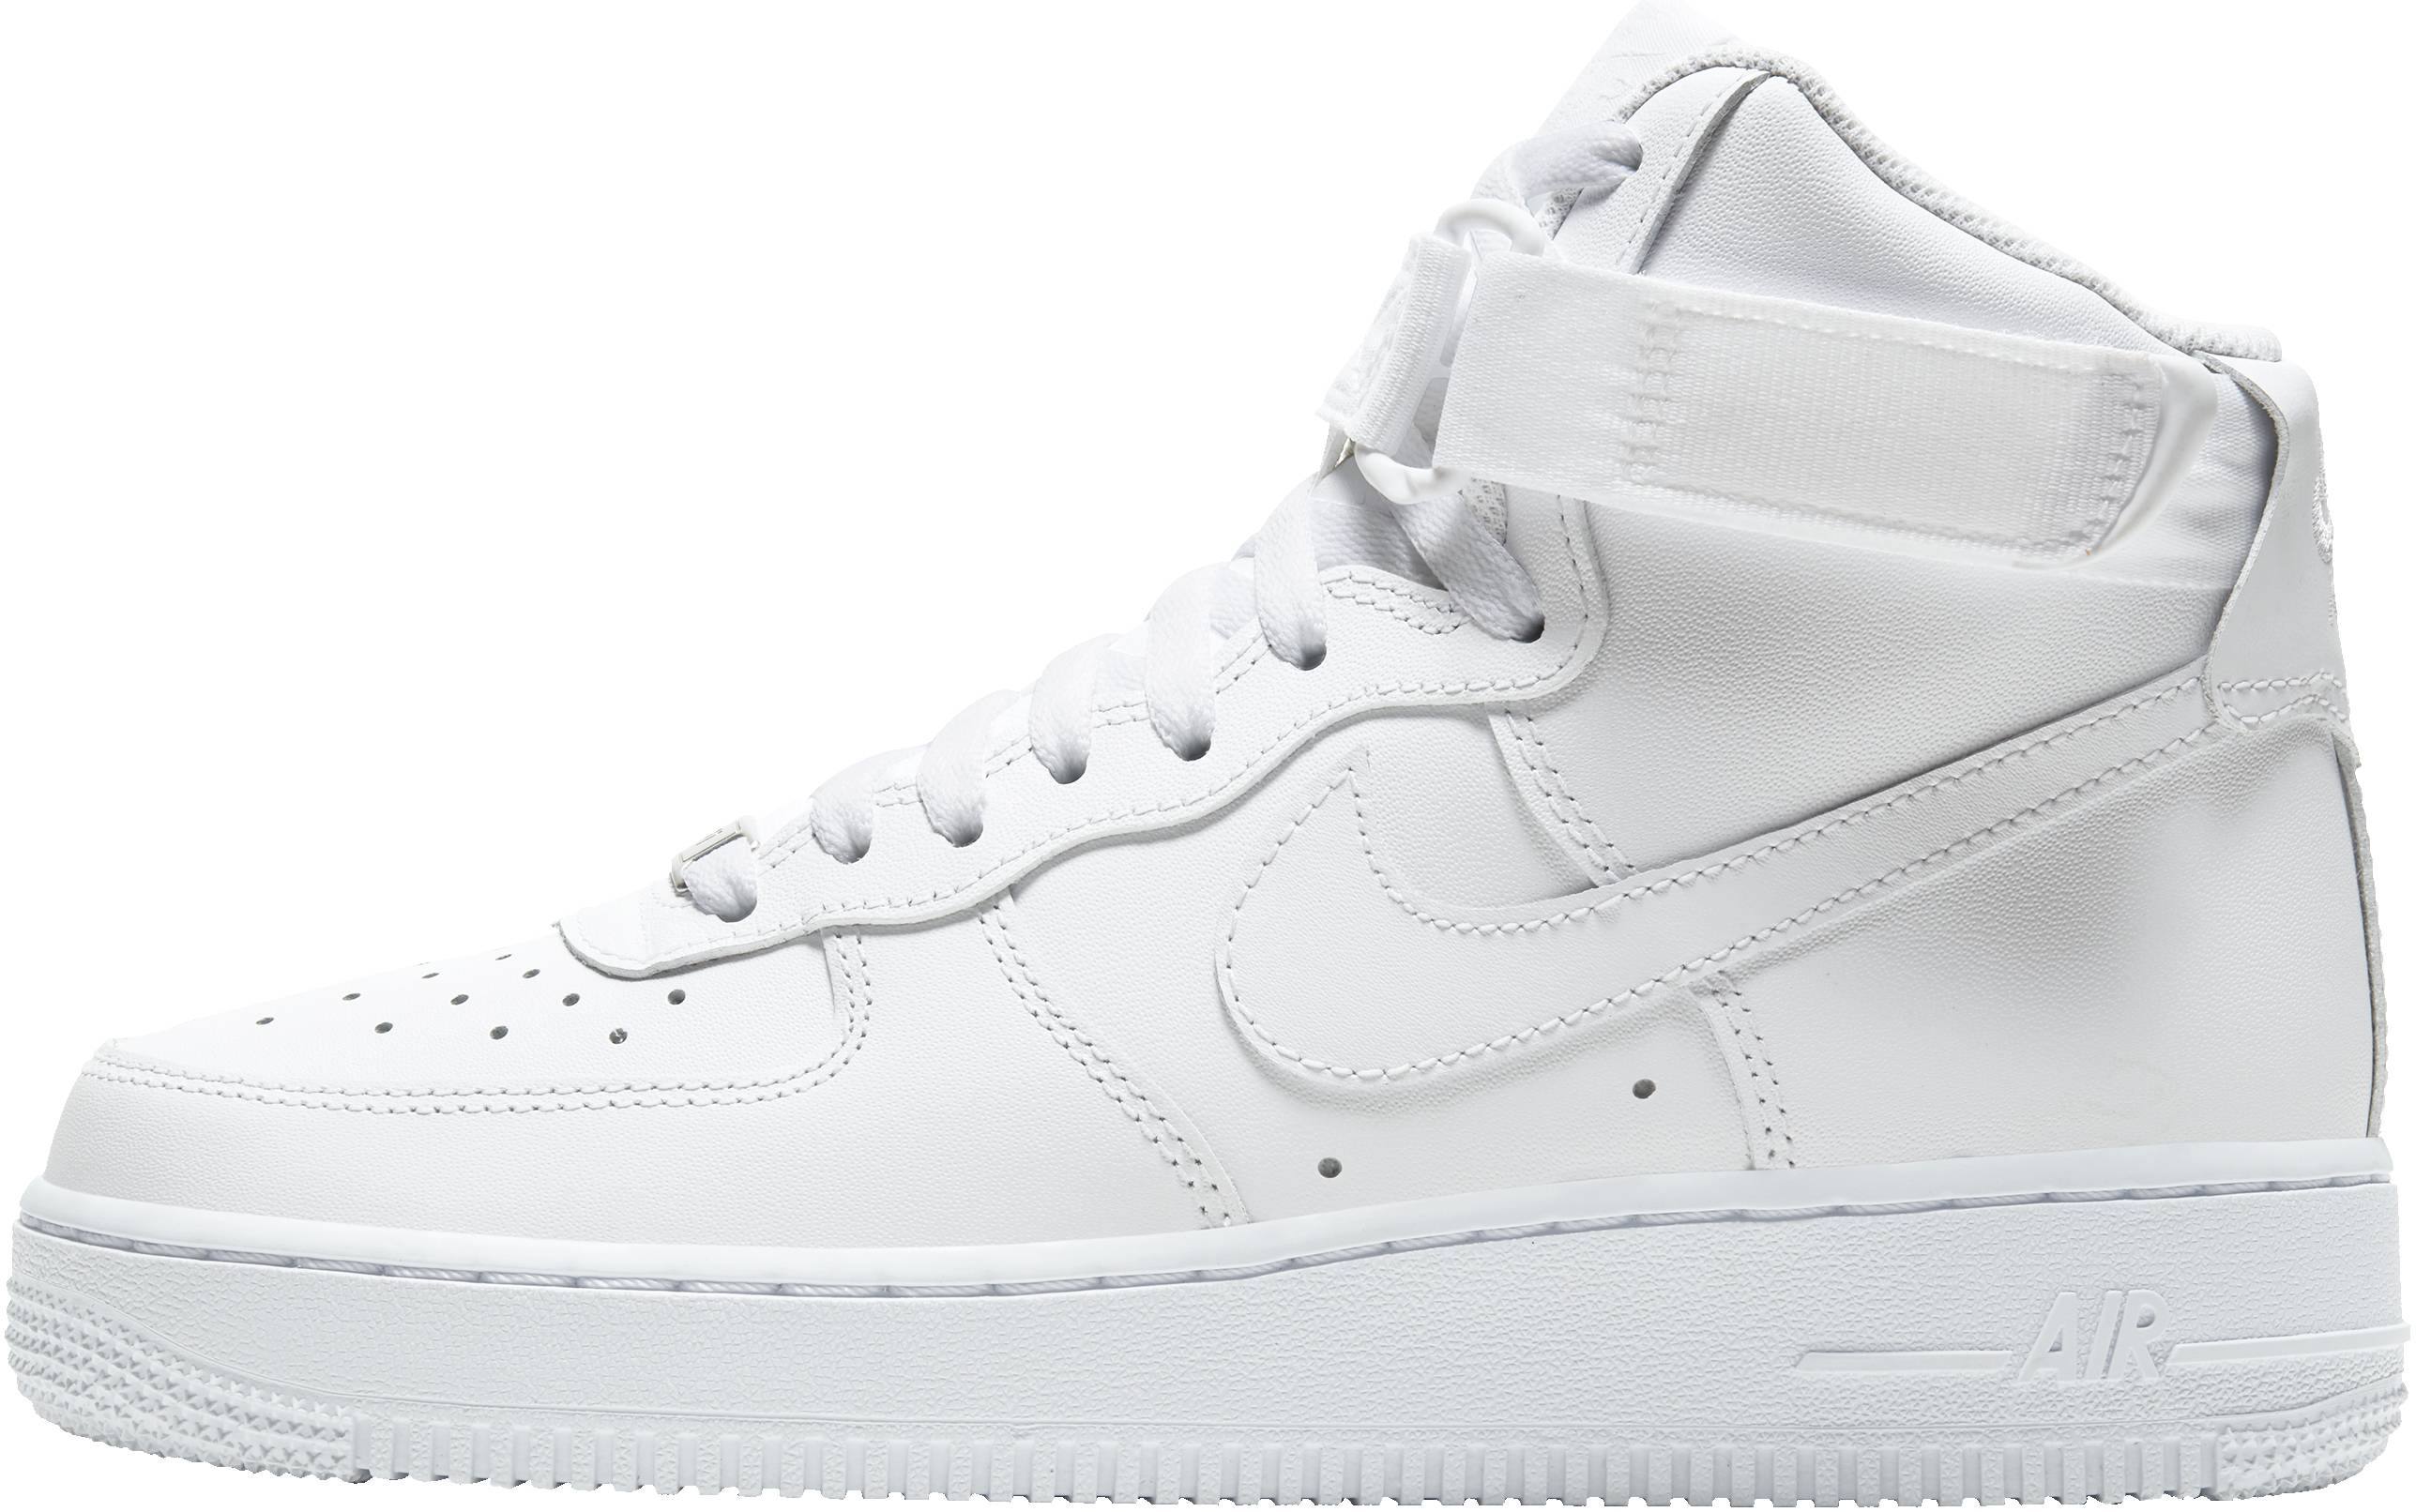 Save 50% on Nike High Top Sneakers (73 